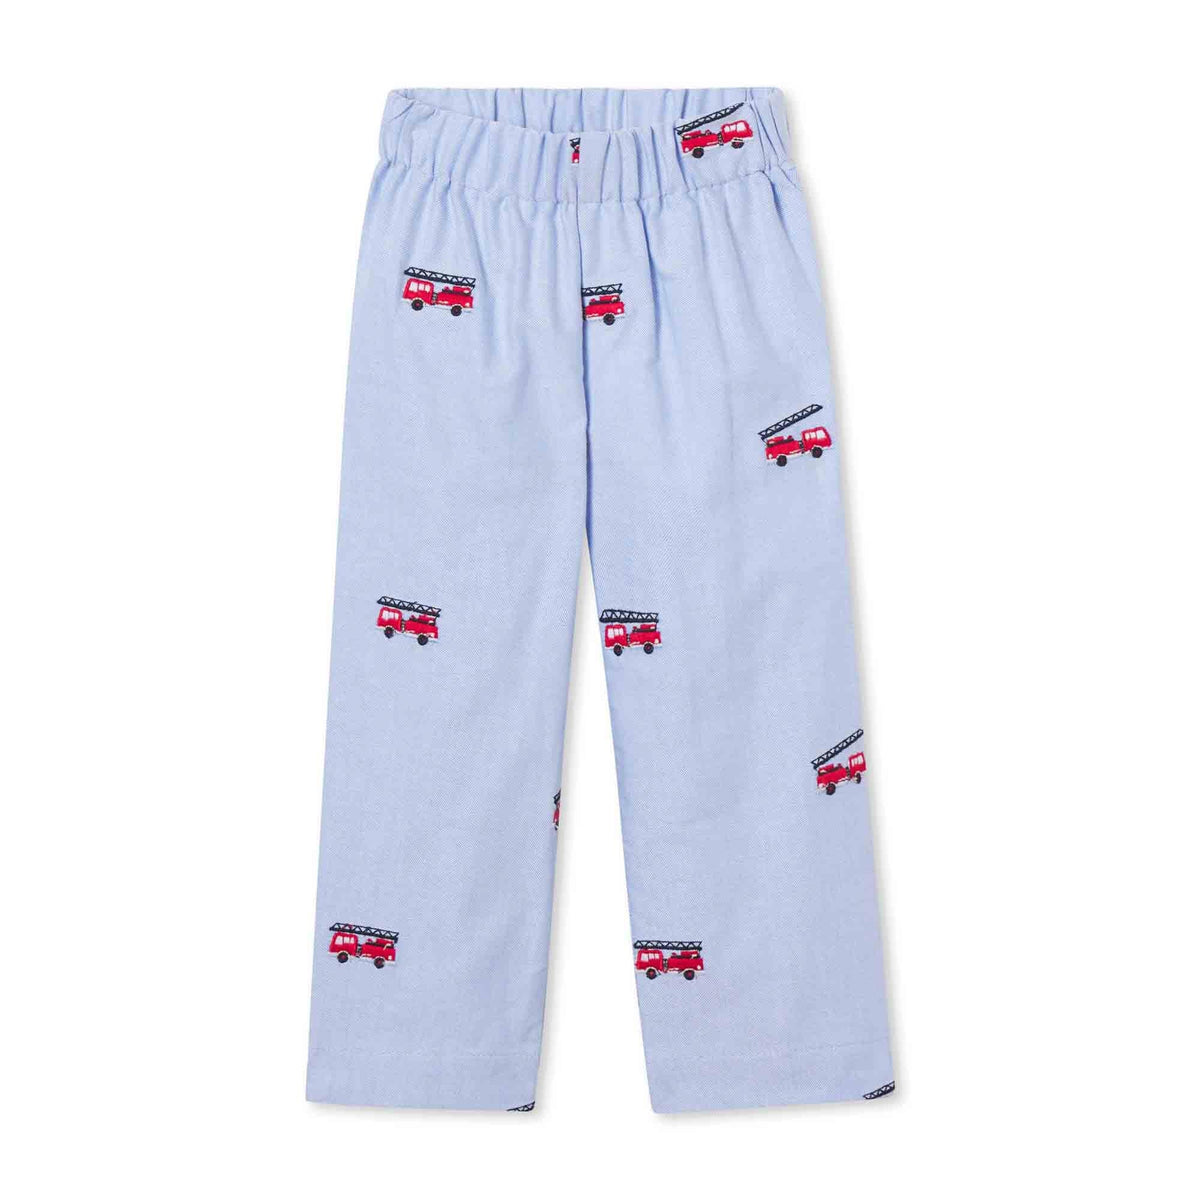 Classic and Preppy Myles Slim Pant, Nantucket Breeze Fire Truck Embroidery-Bottoms-Nantucket Breeze-12-18M-CPC - Classic Prep Childrenswear